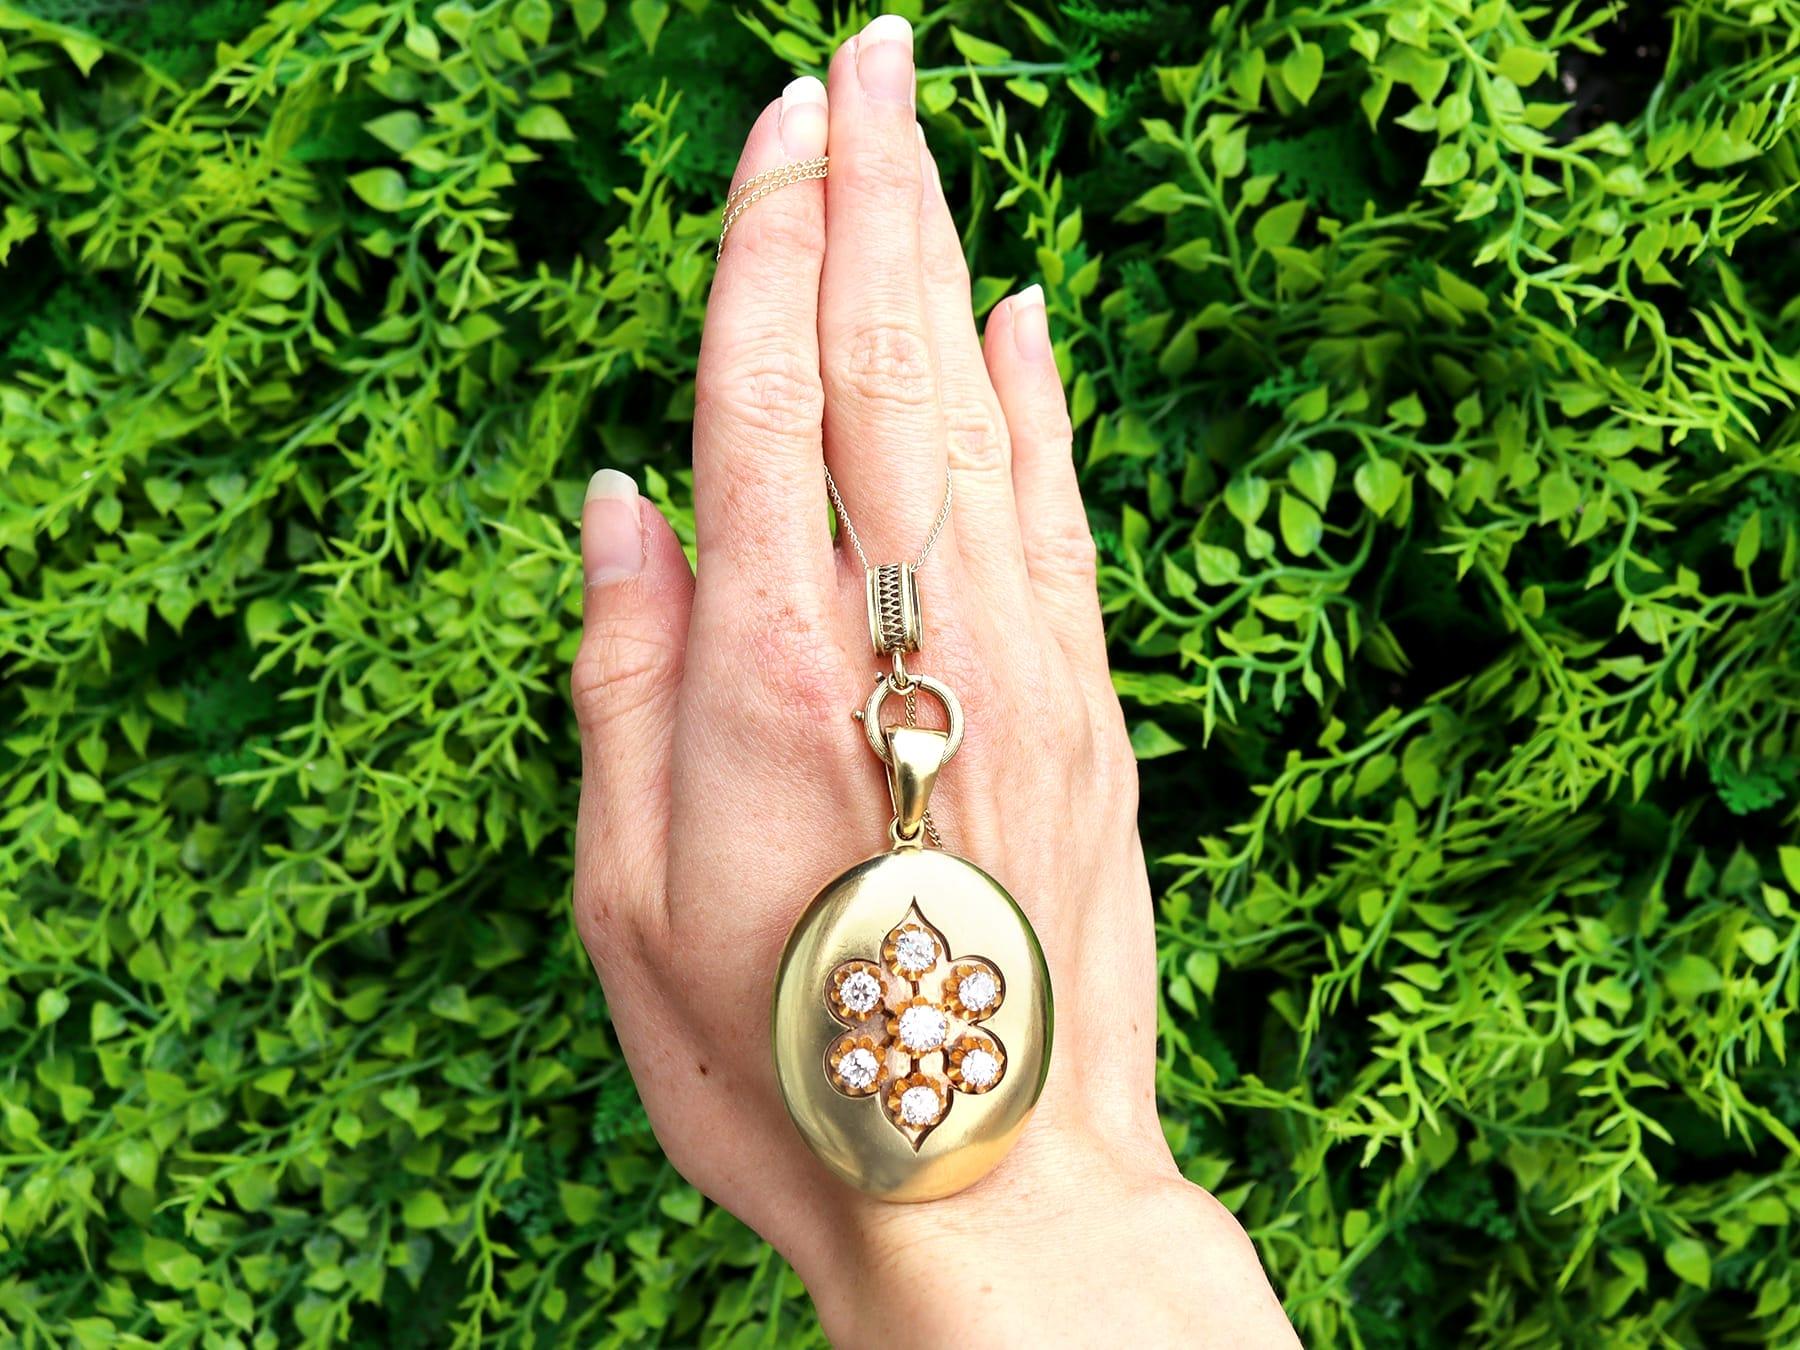 A magnificent, fine and impressive antique Victorian 3.51 carat diamond and 18 karat yellow gold locket pendant; part of our diverse Victorian jewellery collections

This magnificent, fine and impressive Victorian locket has been crafted in 18k